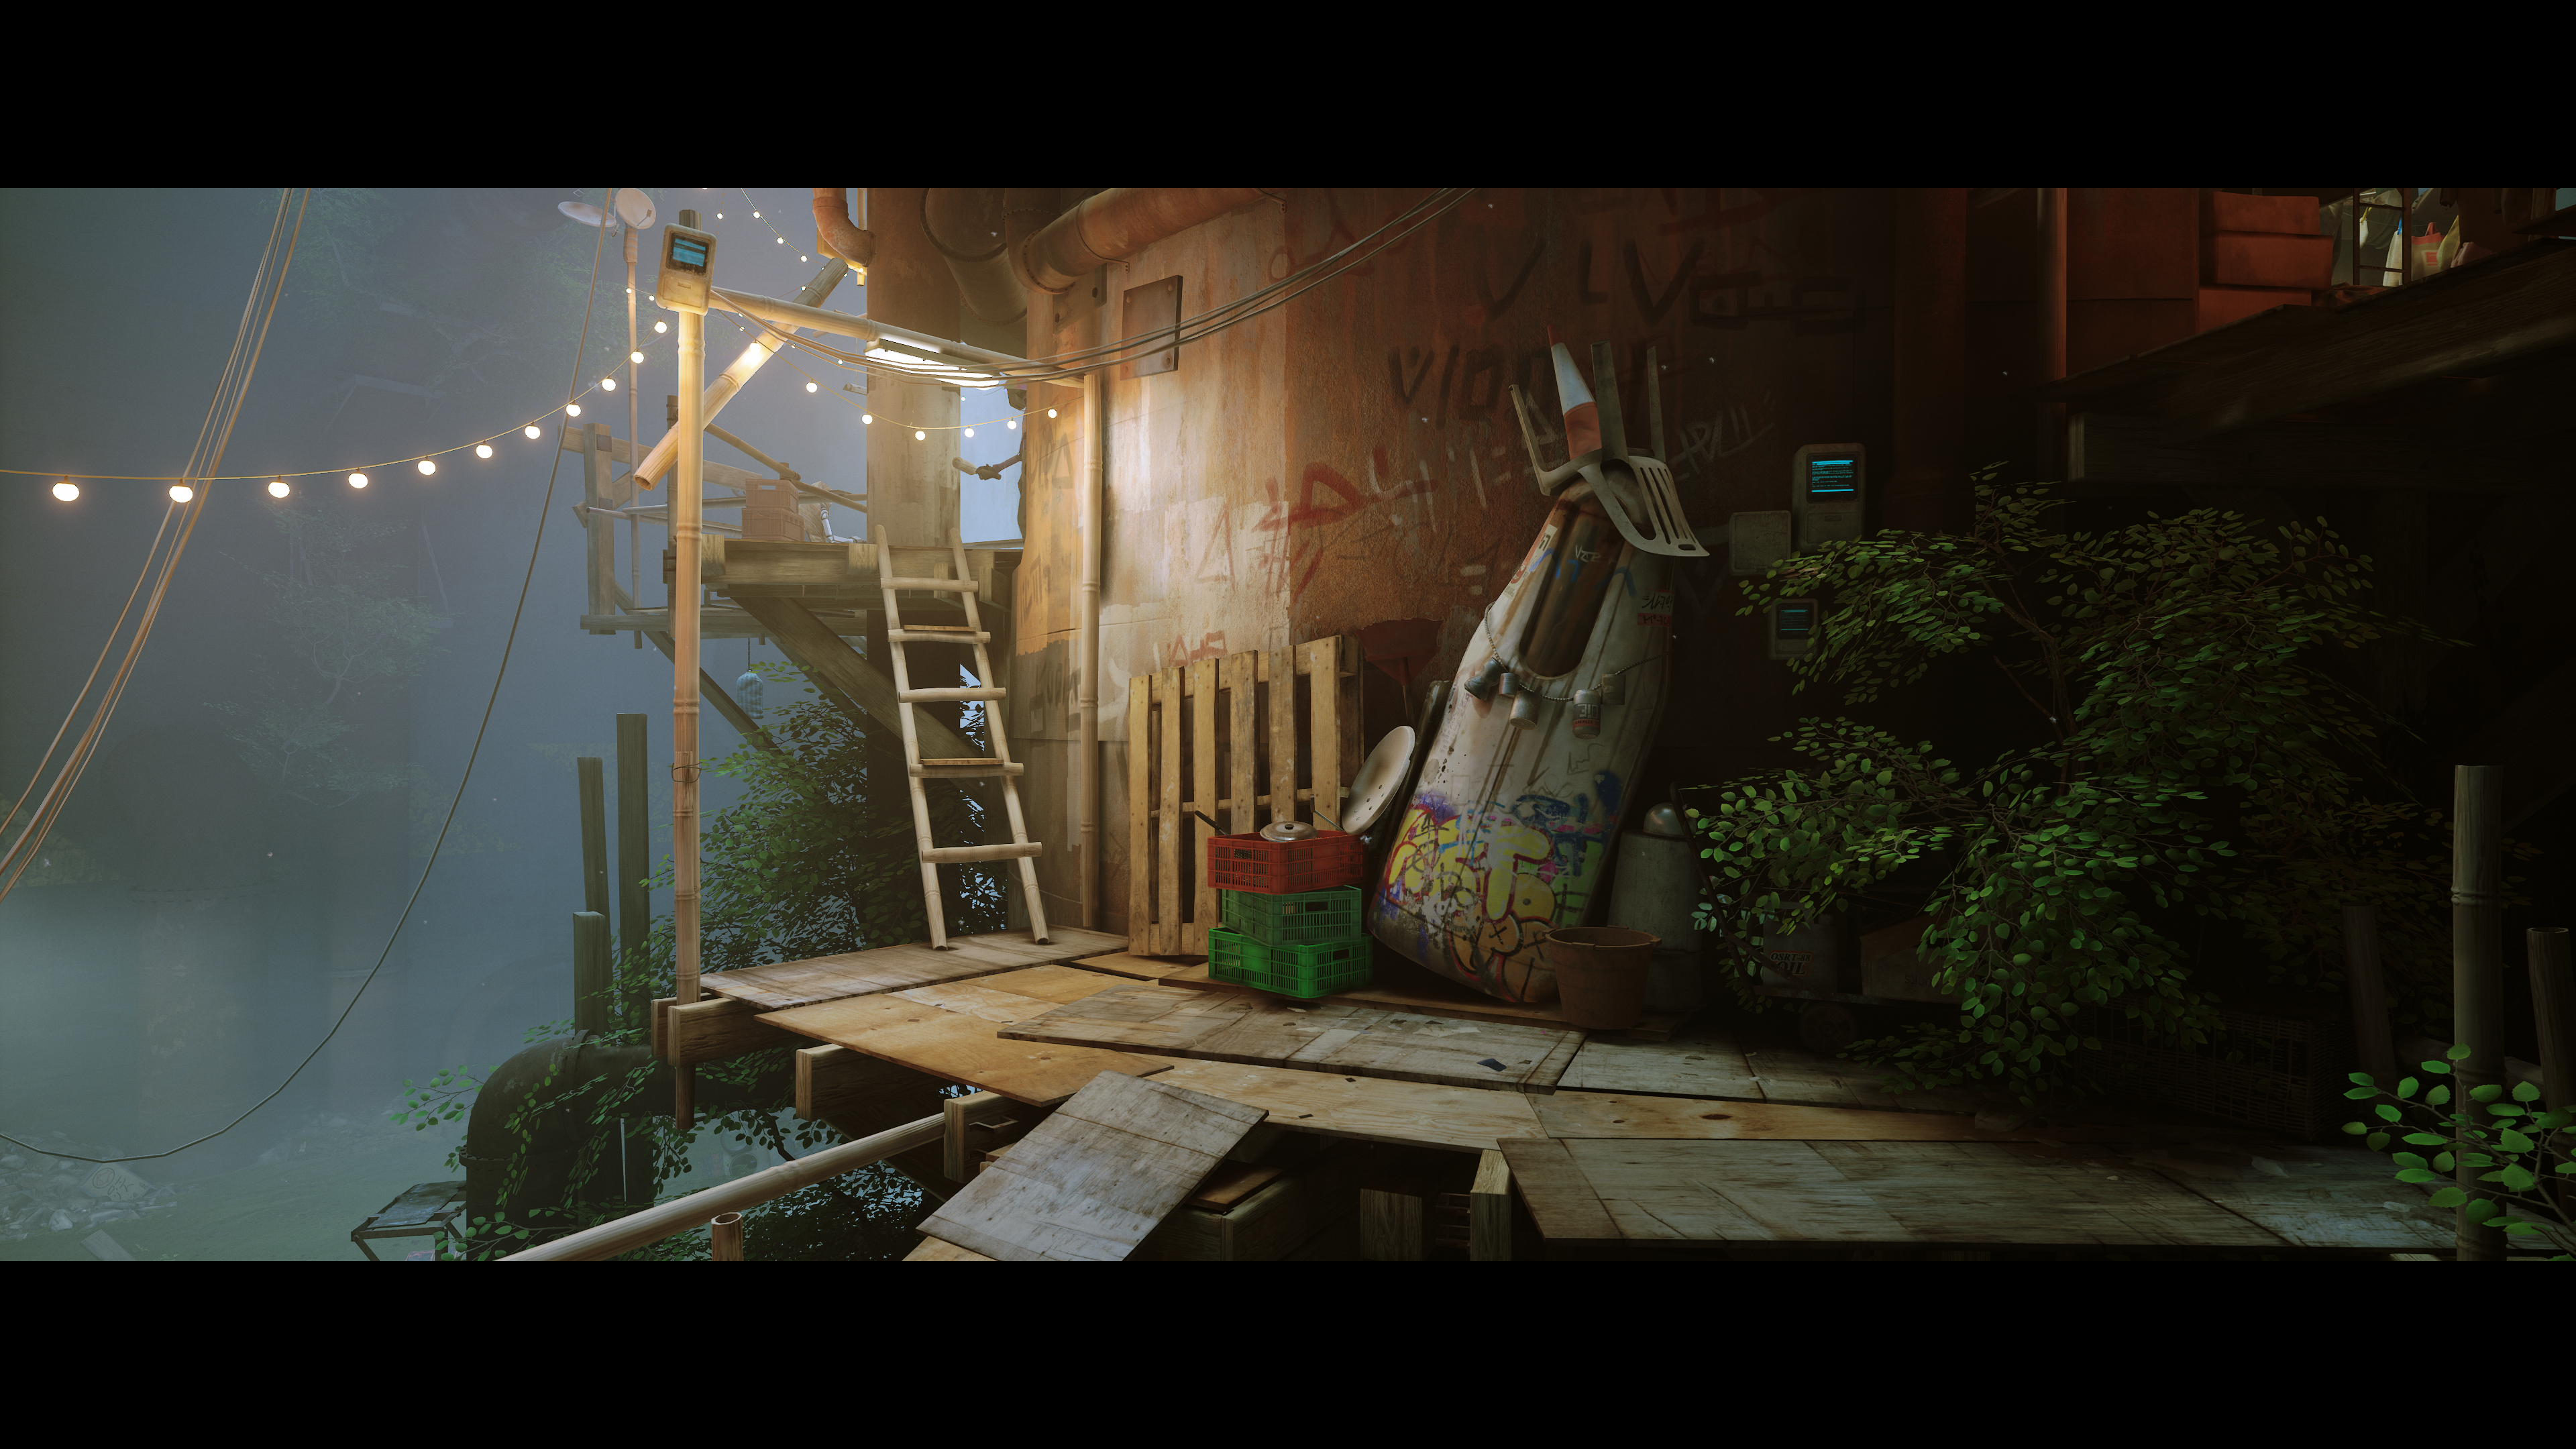 General 3840x2160 Stray video games CGI construction video game art screen shot ladder lights wood graffiti plants wires crate